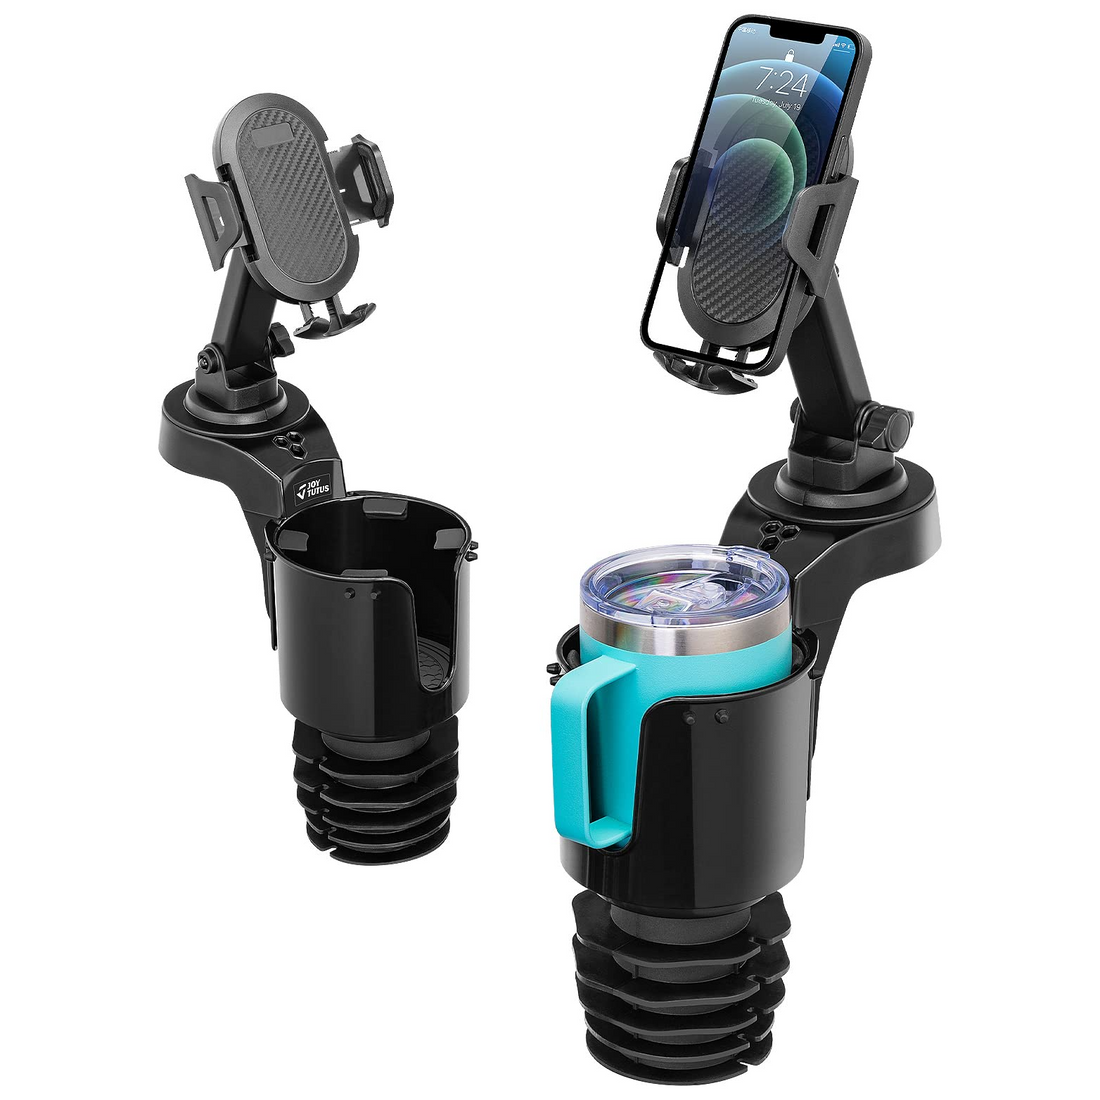 Car Cup Holder Phone Mount ,Universal Adjustable Fit in Smartphone with Screen size from 4-6 inch